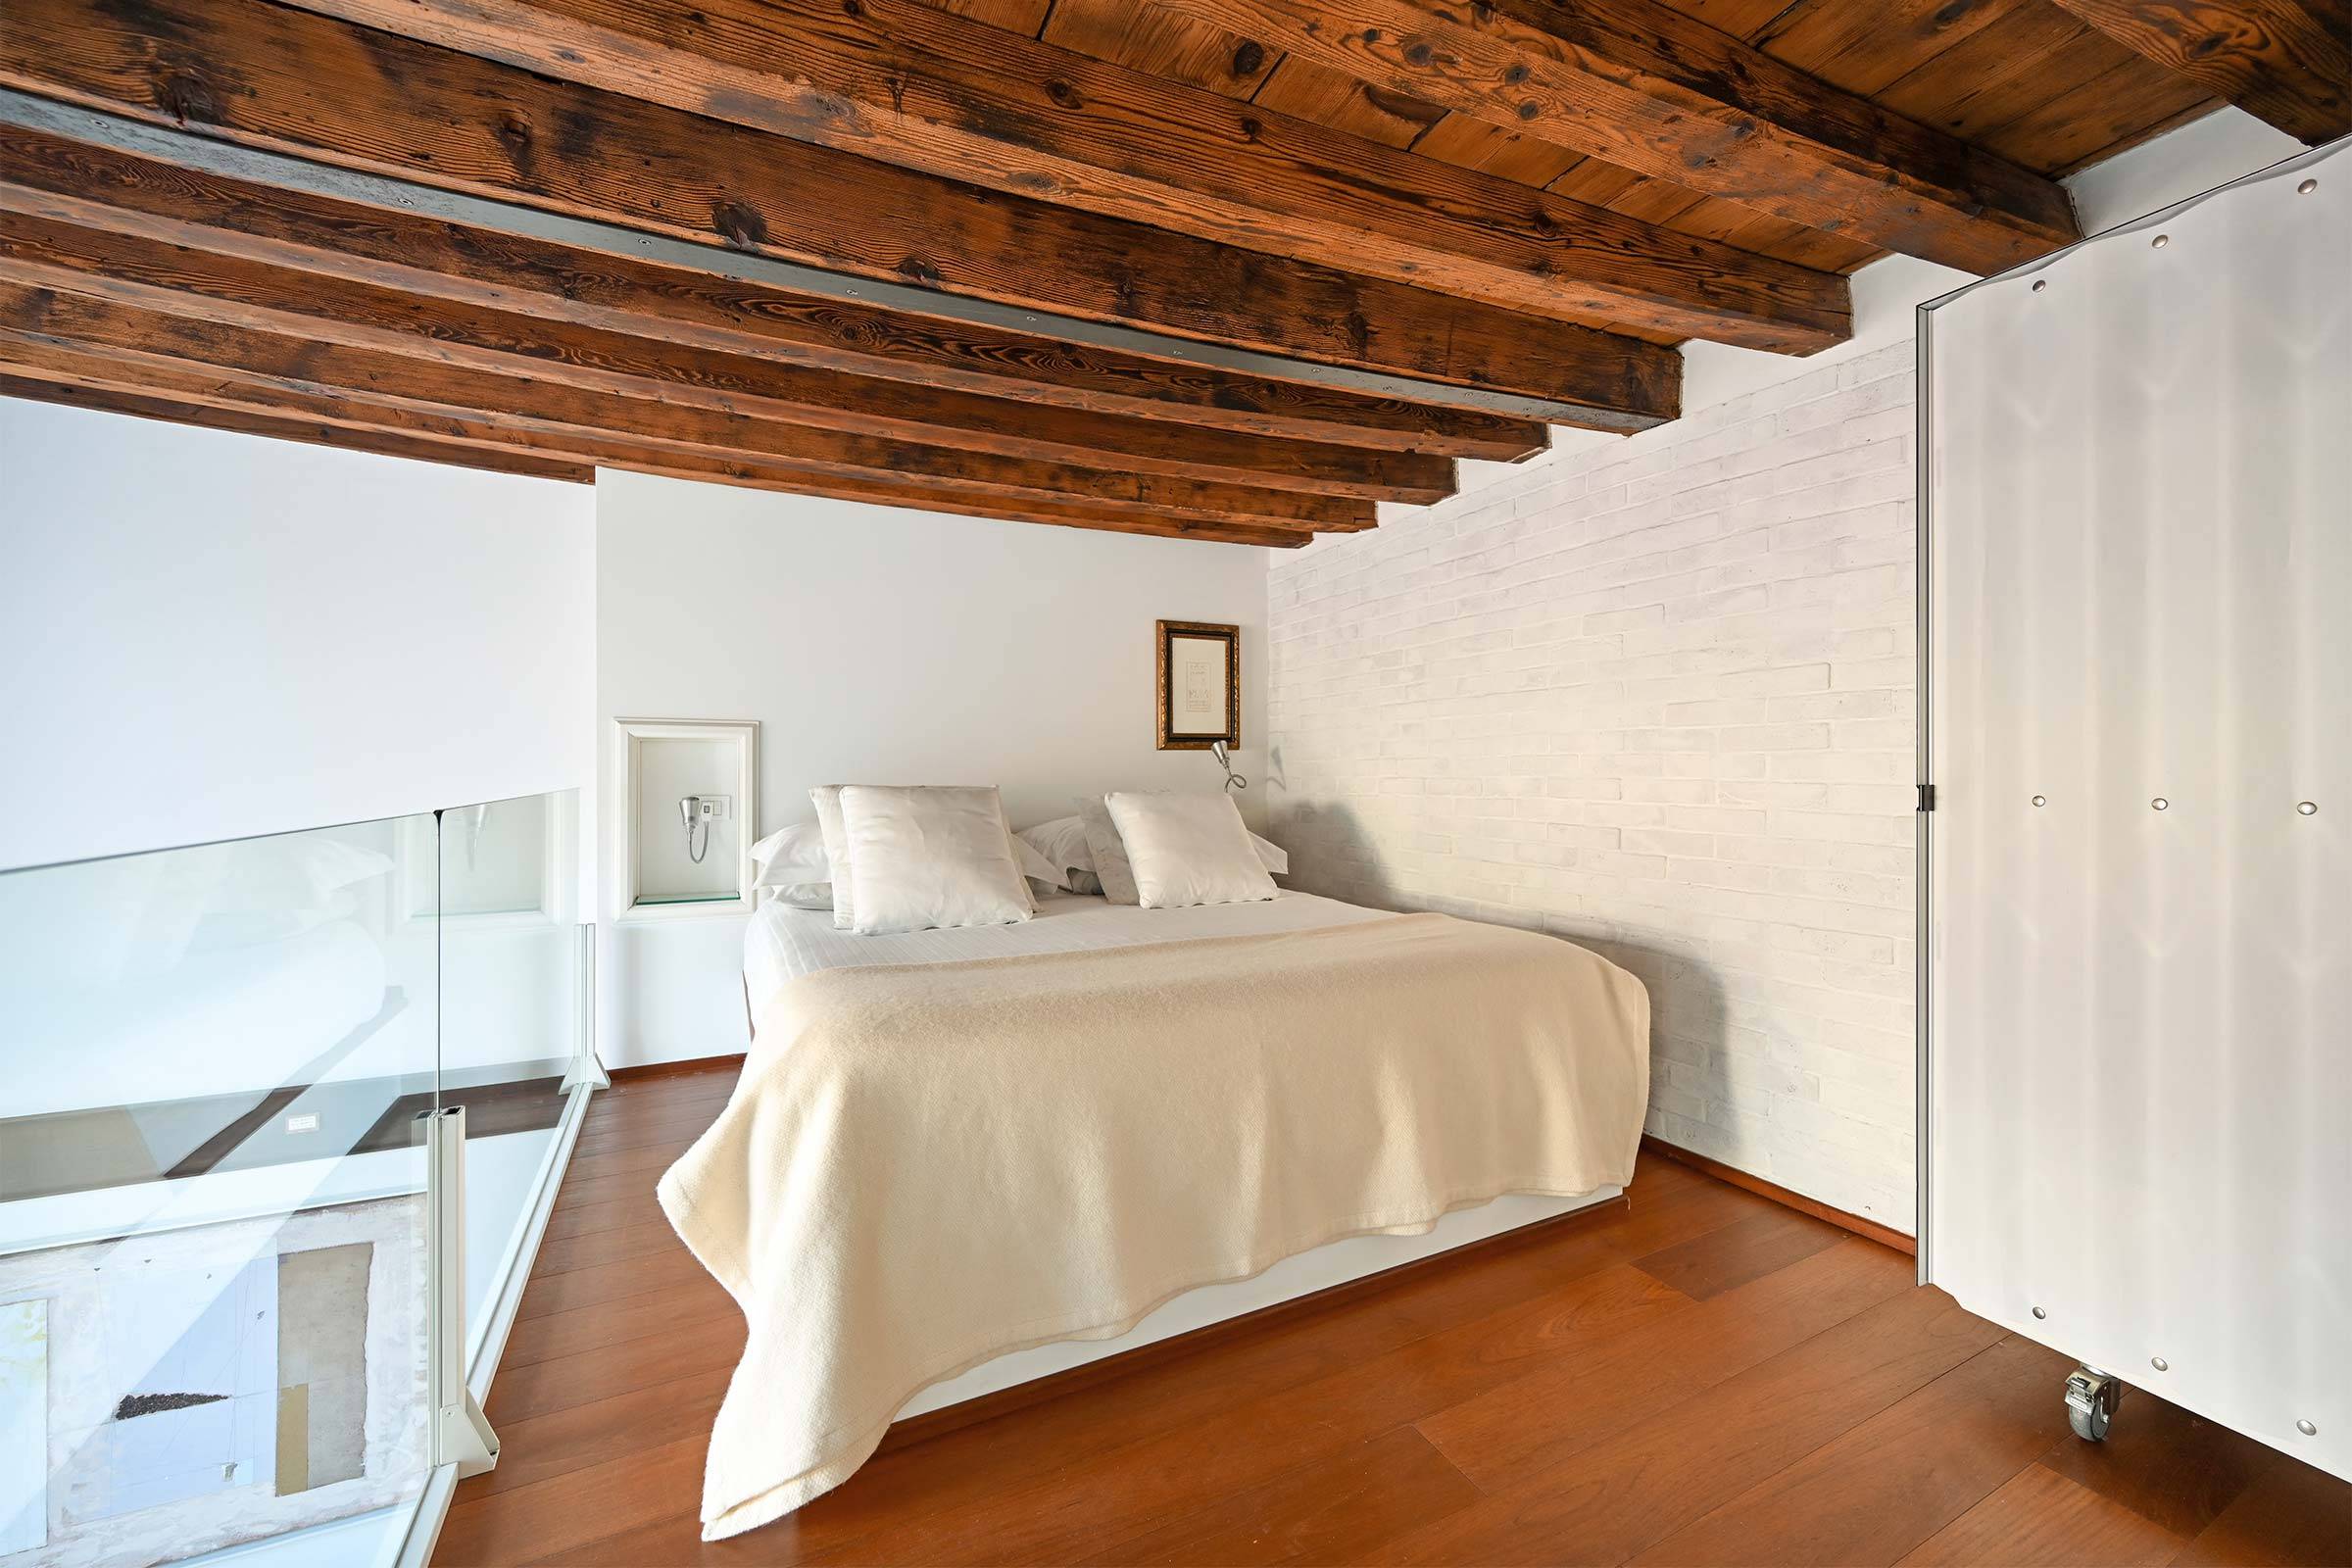 spacious bedroom in the gallery, the height of the wooden beams is about 180 cm